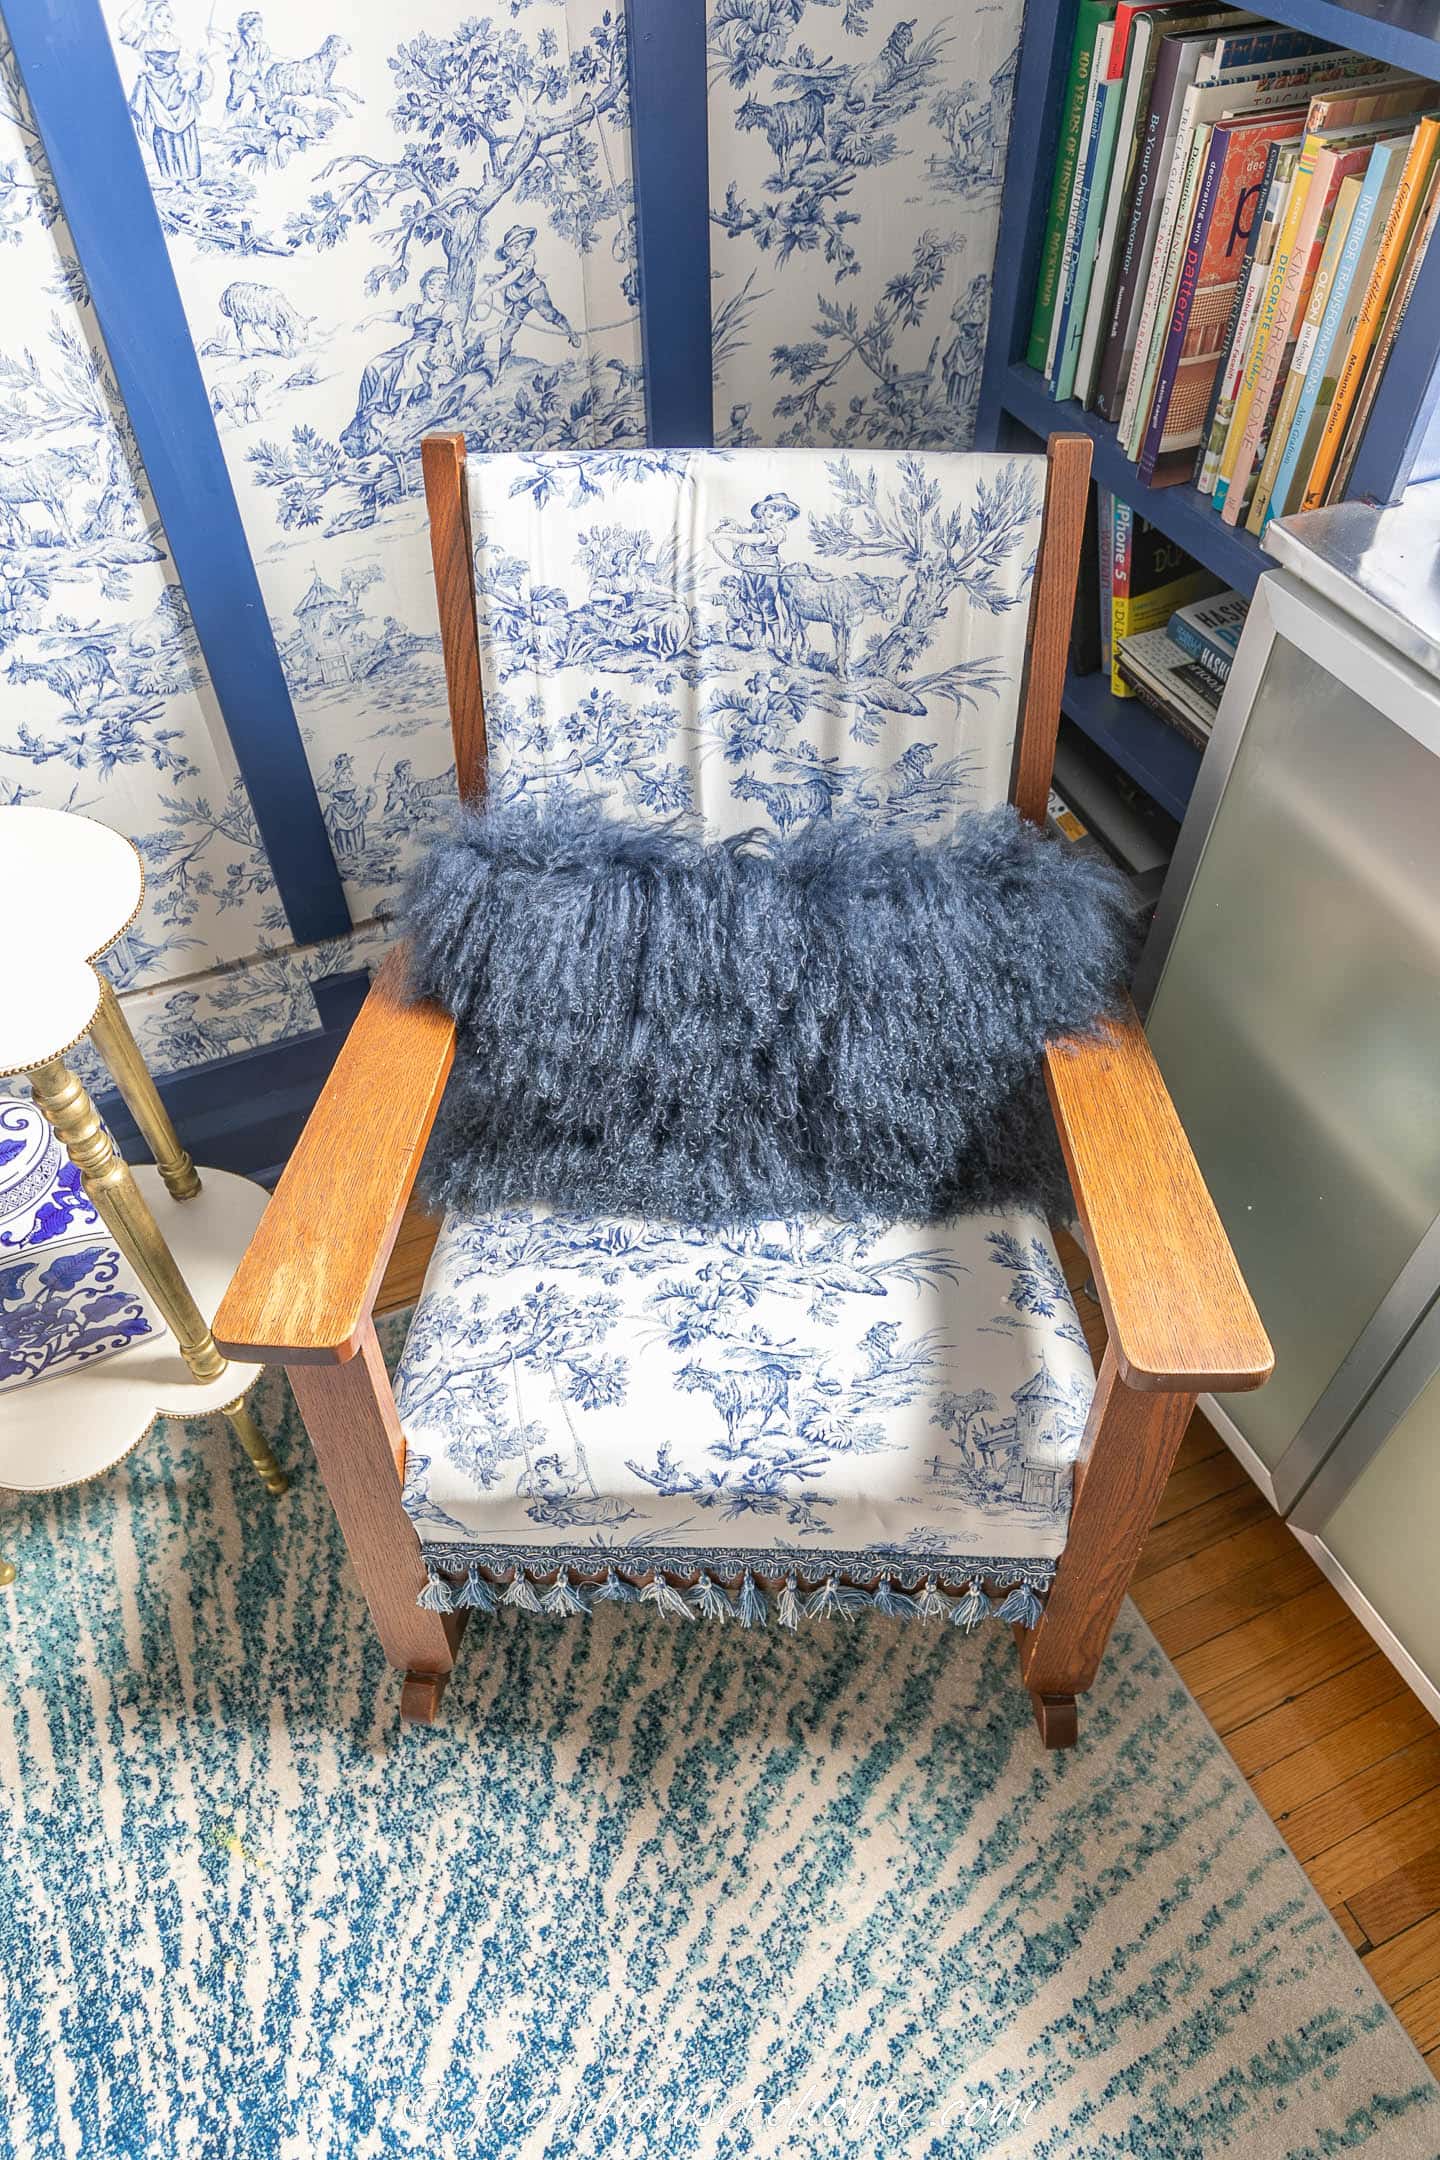 Blue and white toile slip cover on a wood rocking chair with a fluffy blue cushion